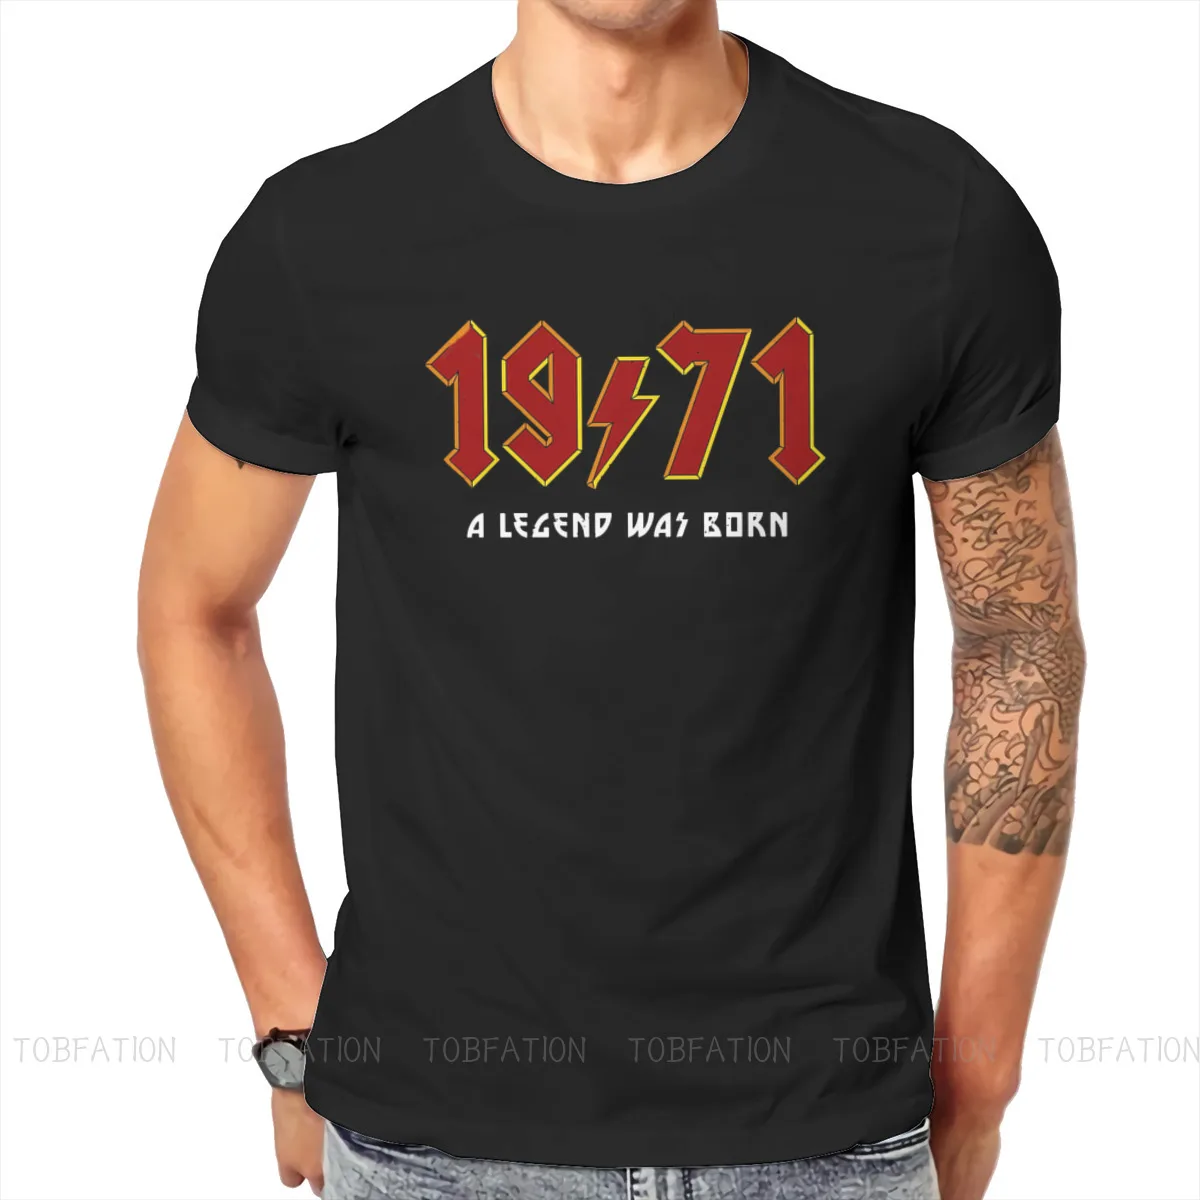 Still Rock Special TShirt 1971 50th Anniversary Leisure Size S-6XL T Shirt Hot Sale T-shirt For Adult